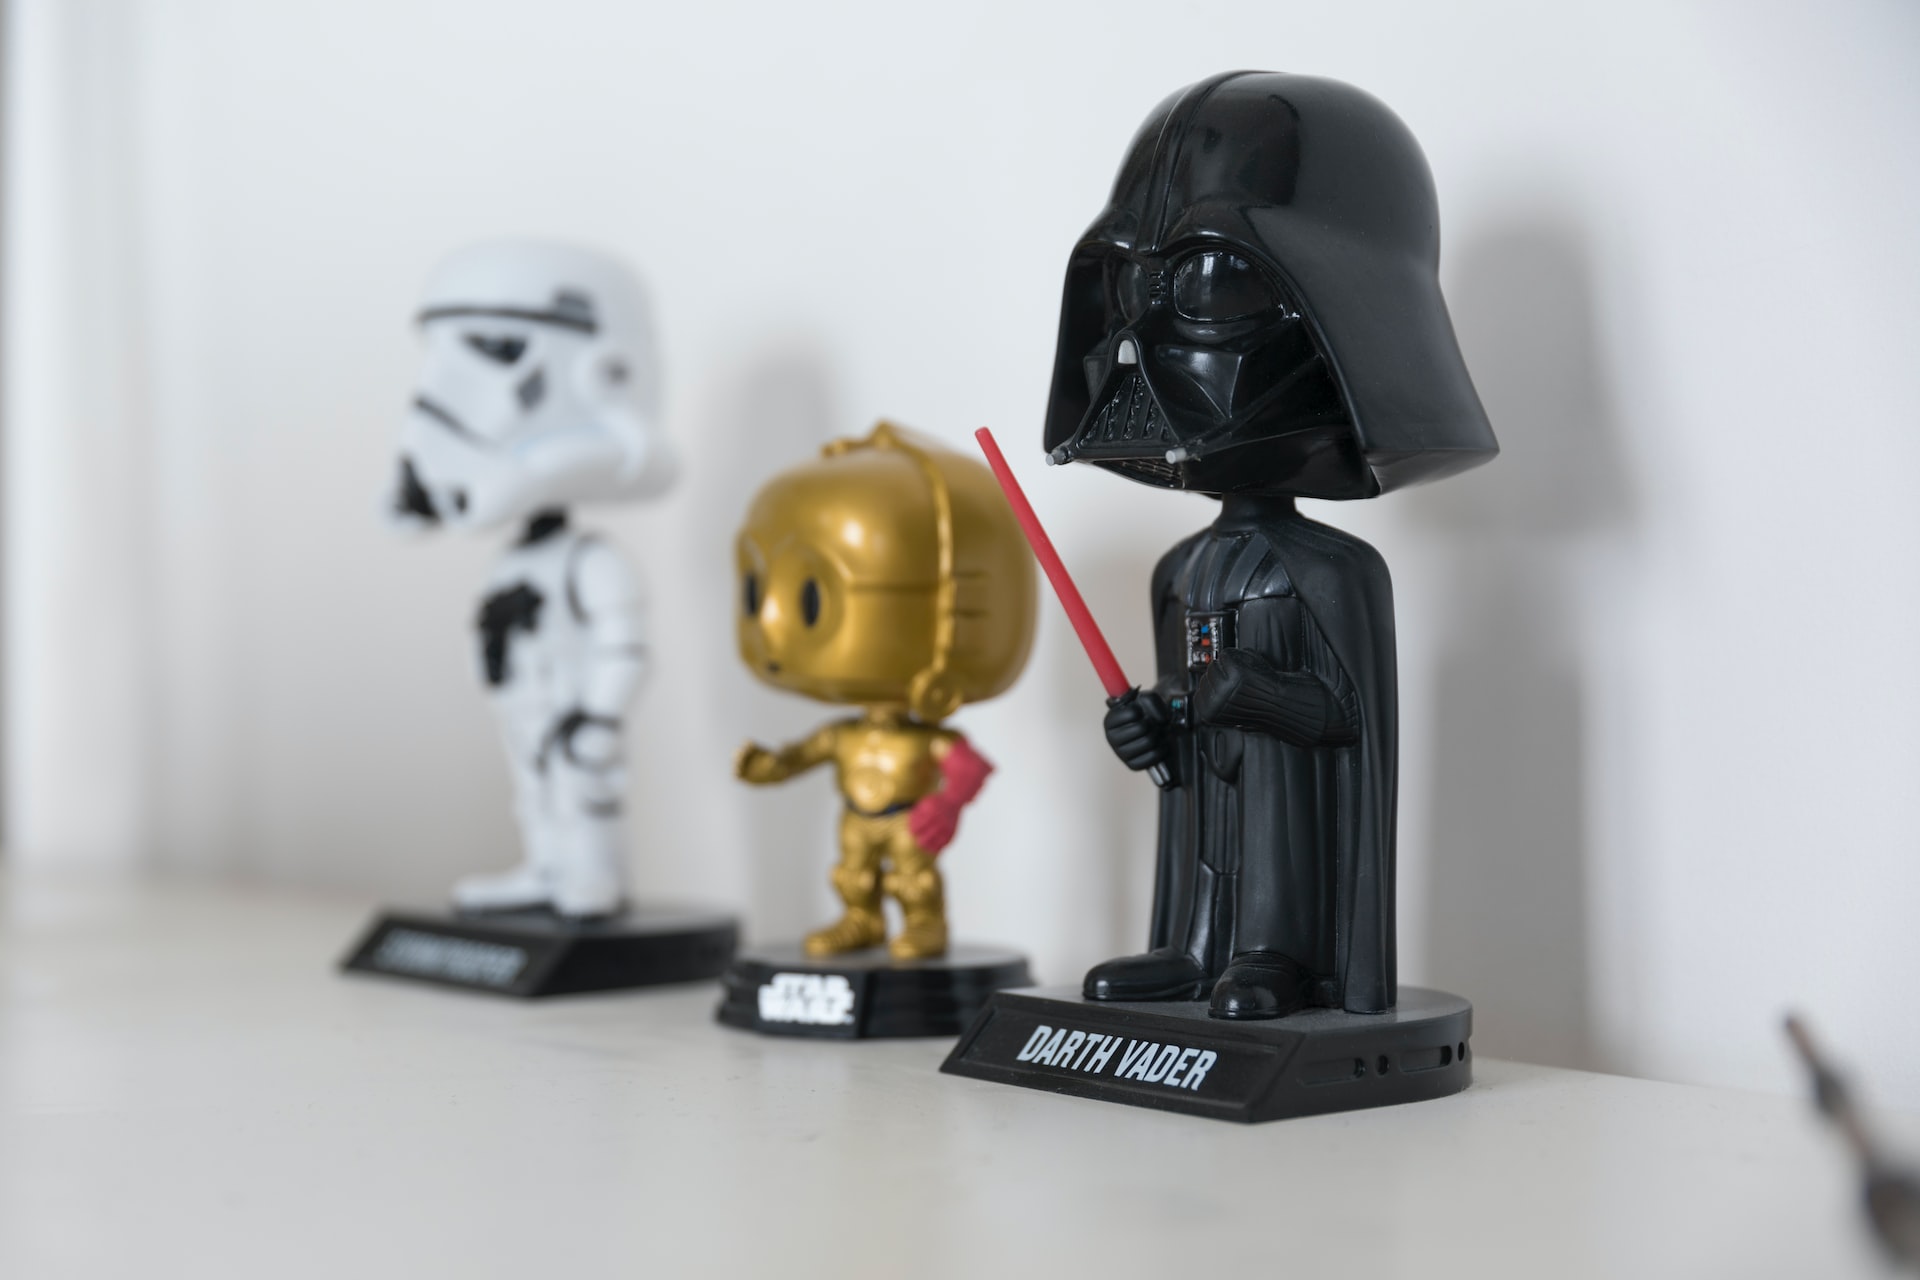 bobbleheads of Star Wars characters